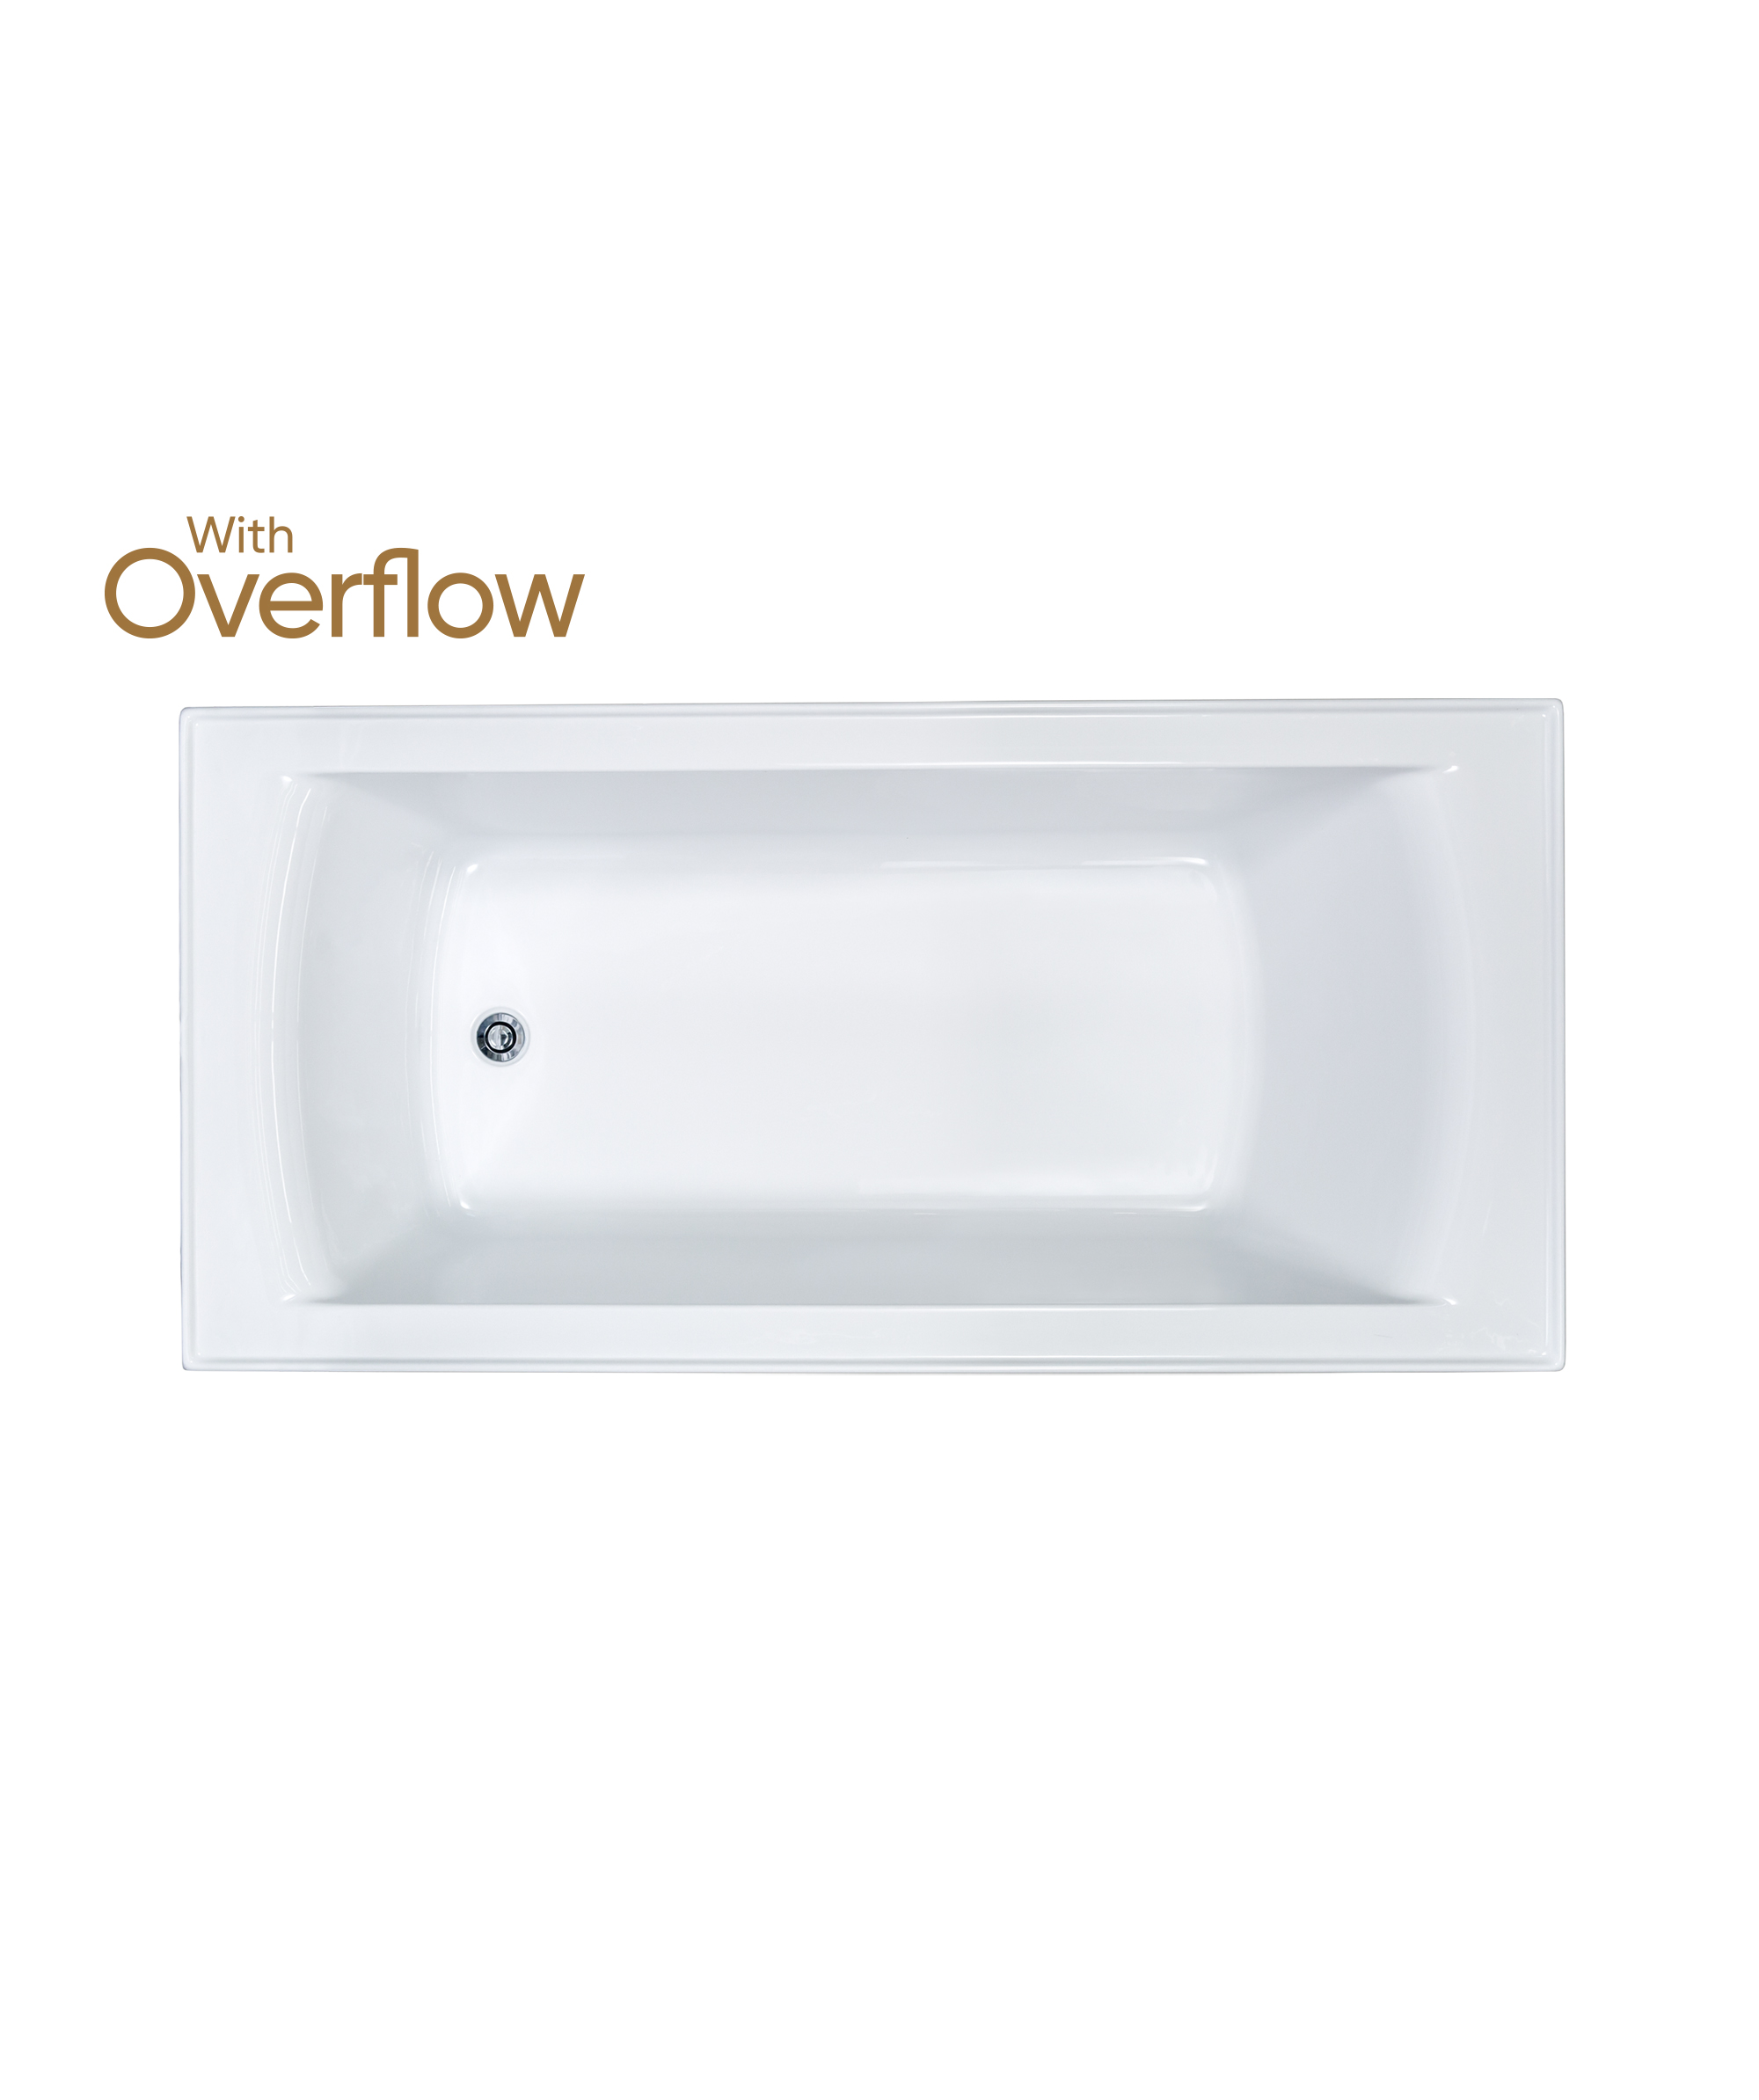 Syros 103 Select inset bath - with Overflow Basic and Plug+Waste - 2 sizes